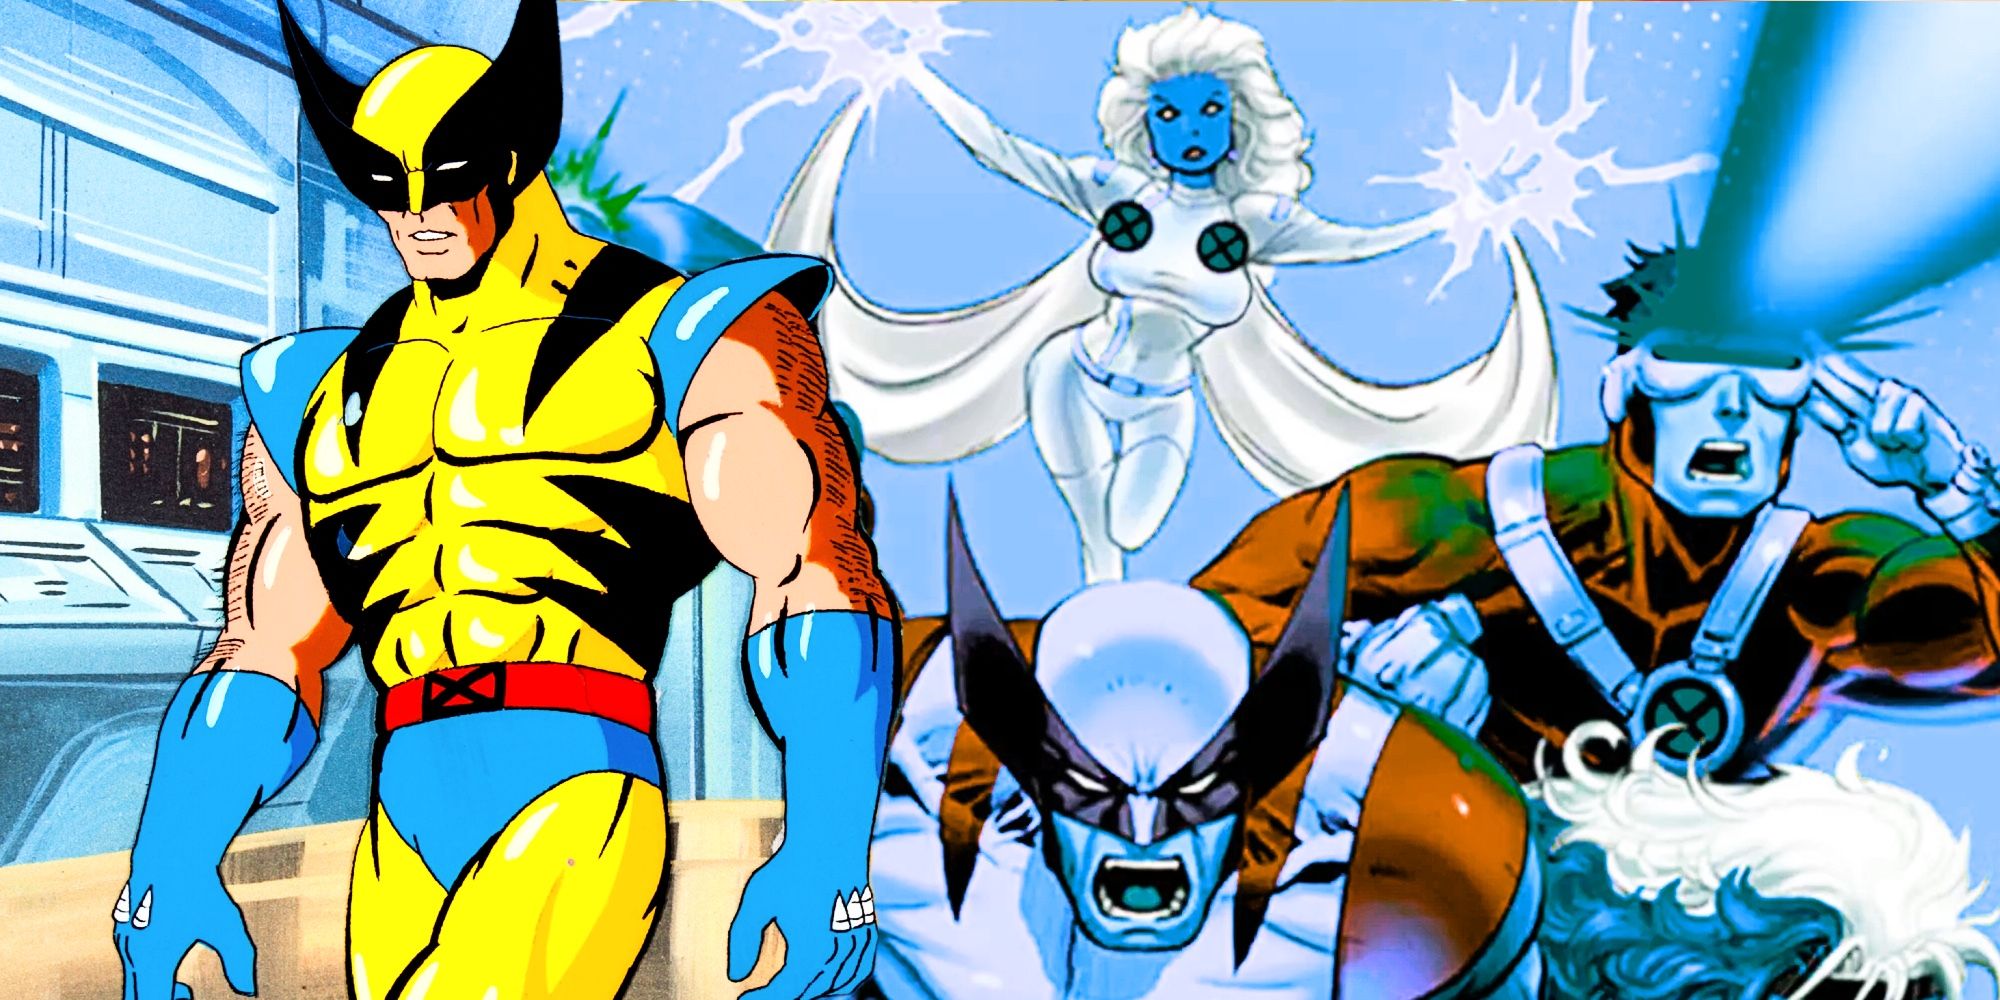 Brief 'X-Men '97' Synopsis Confirms the Big Bad of the New Series